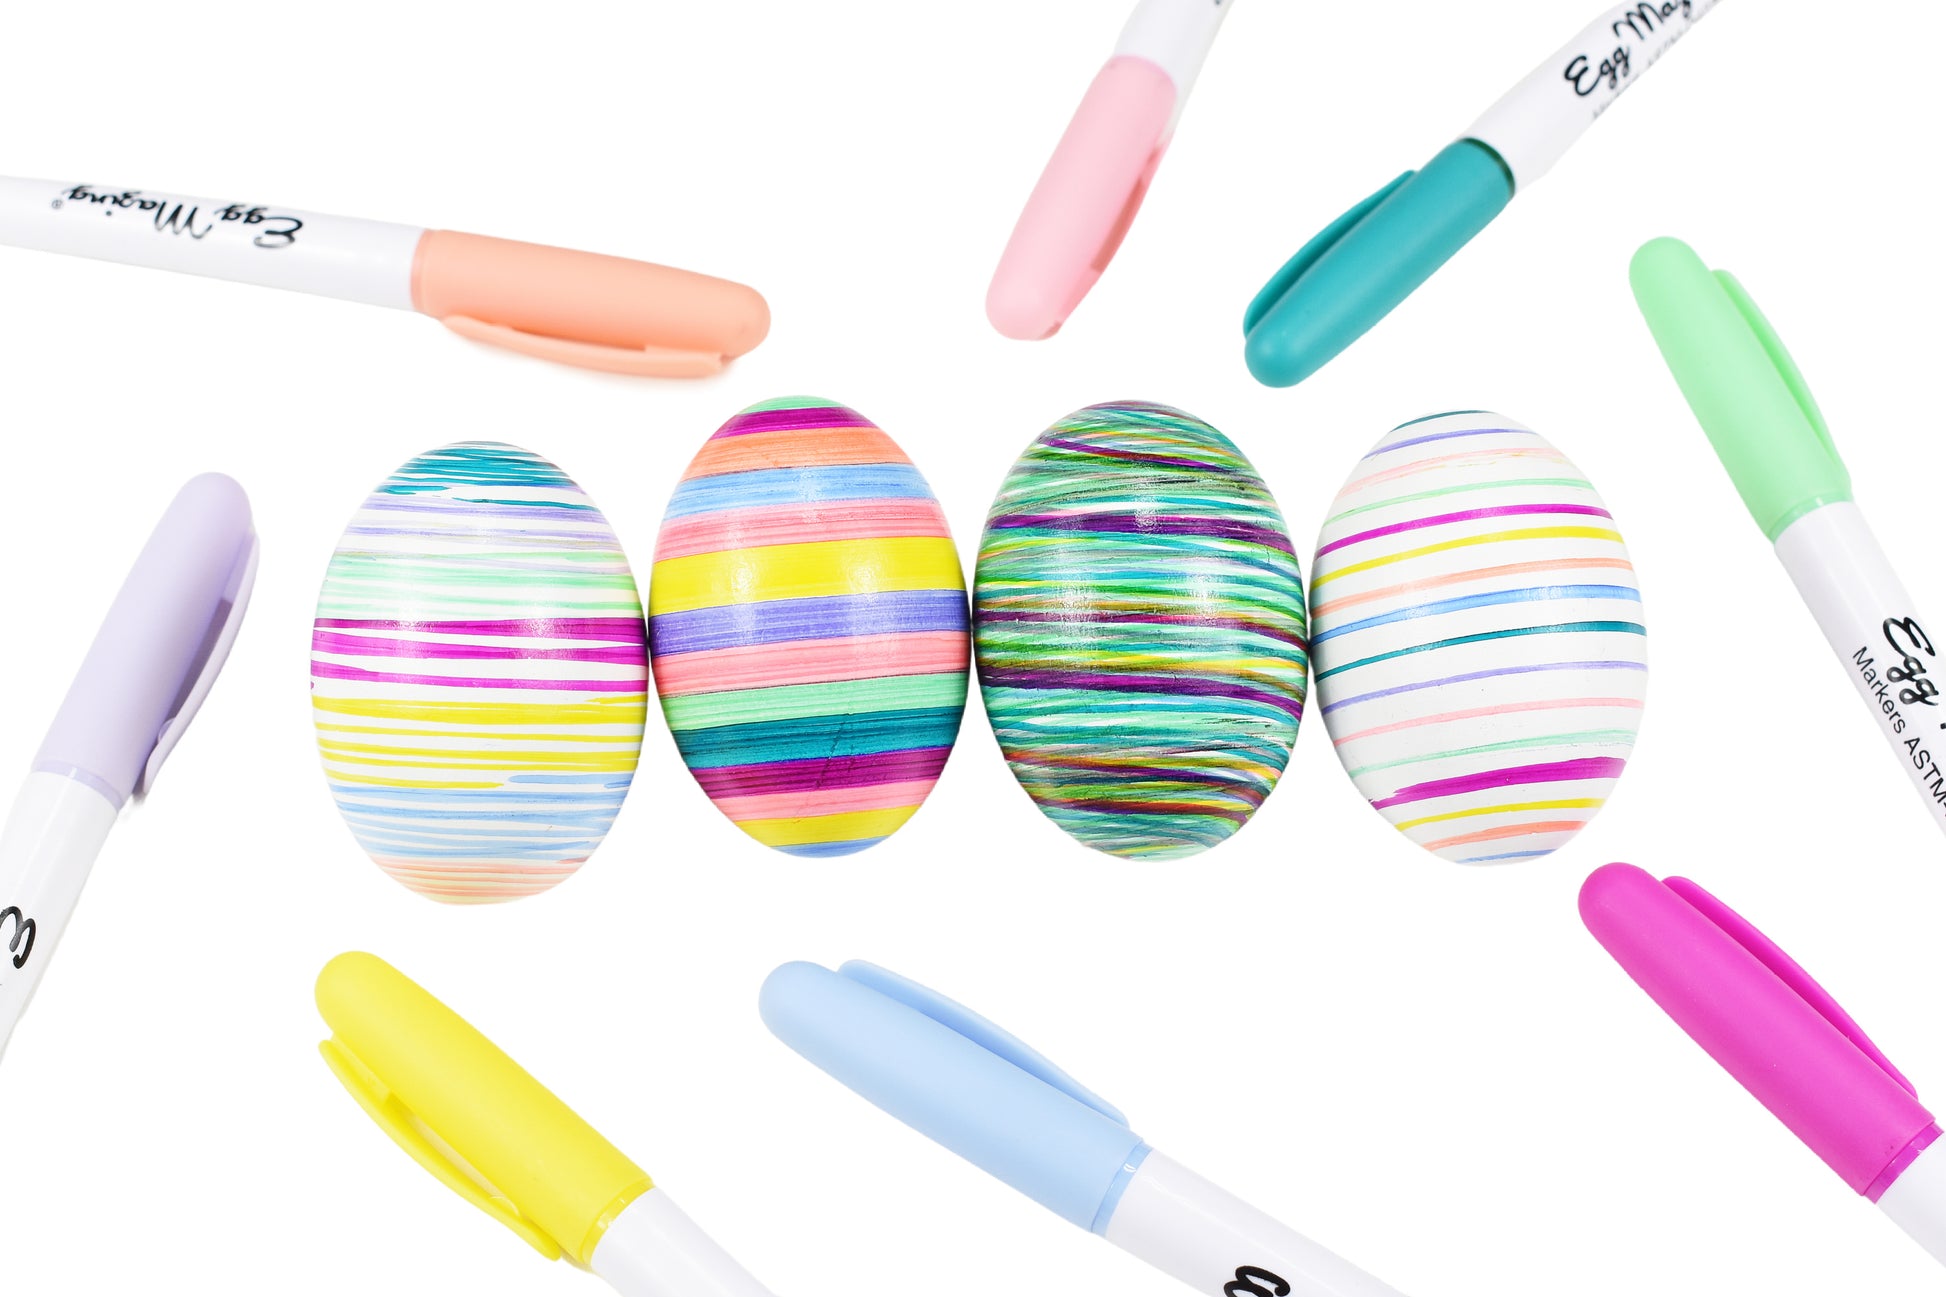 Image showing a variety of colorful markers and four striped eggs. Colors include bright pink, mint green, light blue, peach, turquoise, yellow, light pink, and light purple. 